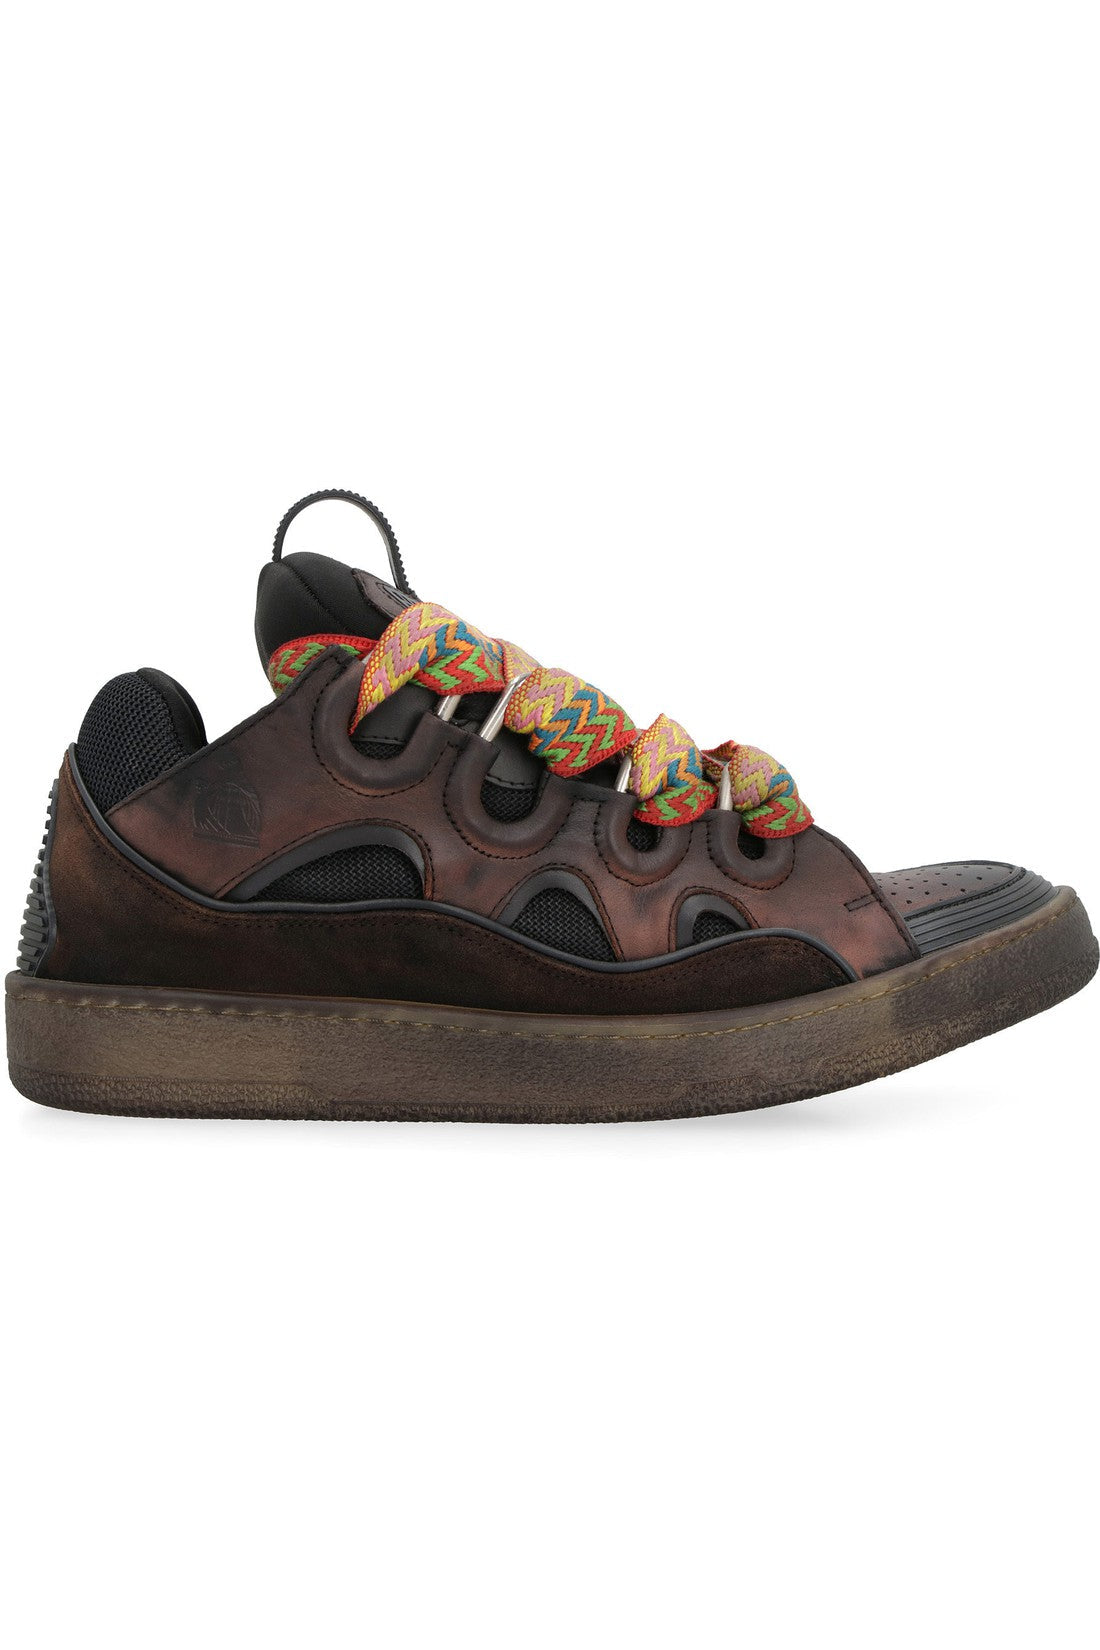 Lanvin-OUTLET-SALE-Curb chunky sneakers-ARCHIVIST